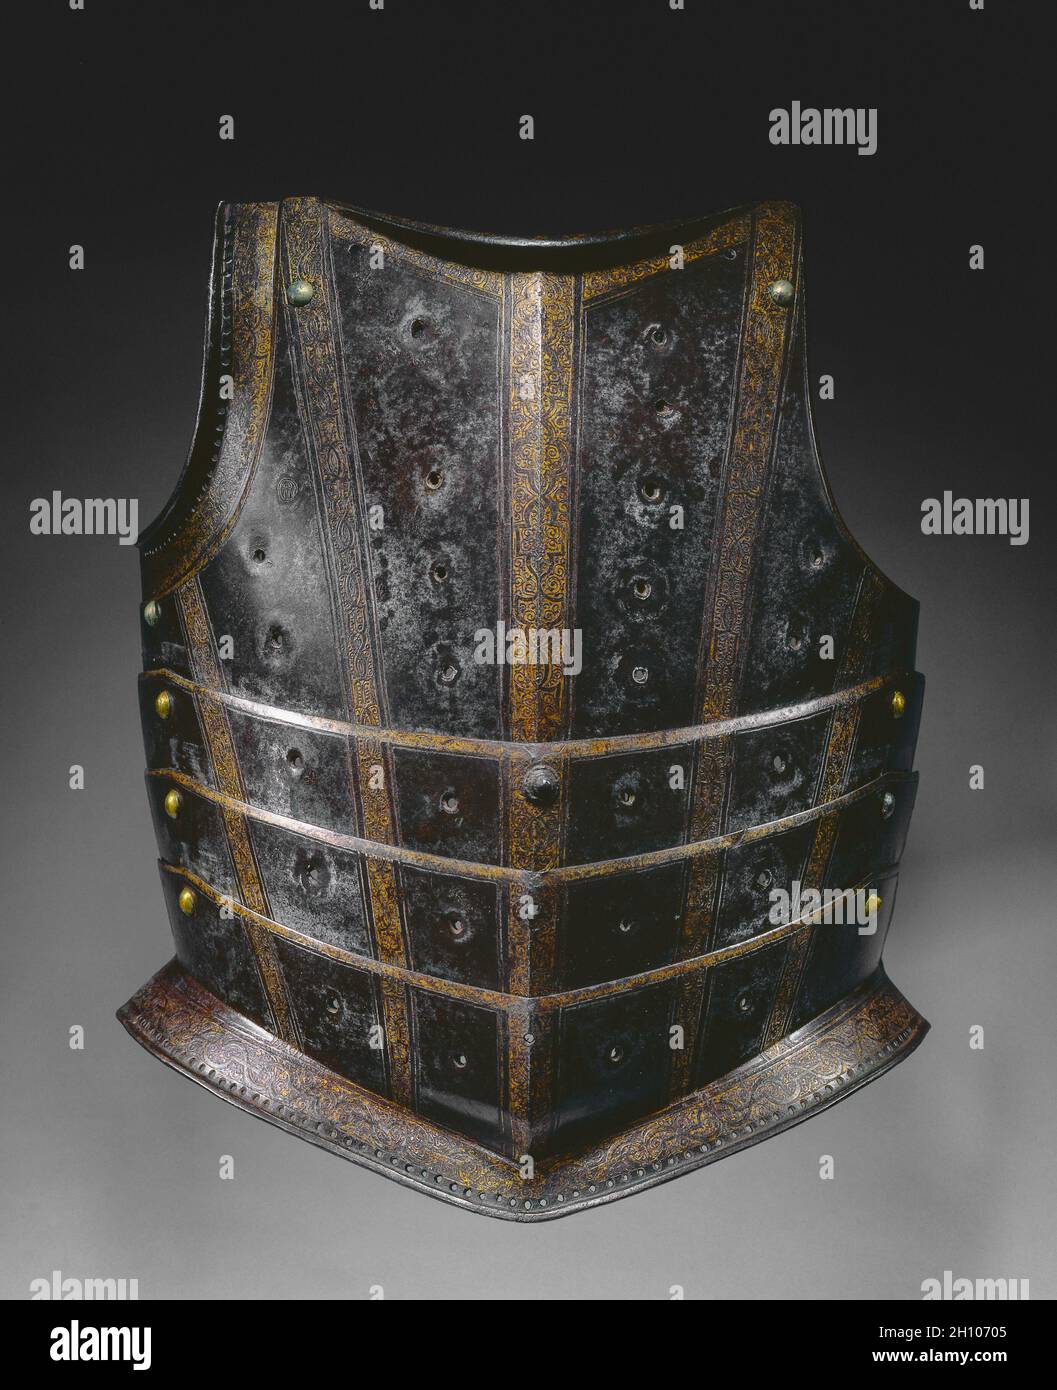 Breastplate from Hussar's Cuirass, c. 1580. Germany, Augsburg or Hungary, 16th century. Steel (originally blued, now russet), etched and gilded strapwork bands; ; overall: 42.3 x 35 cm (16 5/8 x 13 3/4 in.).  This style of breastplate, with its numerous articulating lames, was probably used by a Hungarian hussar, a type of light cavalryman. The steel plates were originally blued-now turned russet-and etched and gilded with strapwork bands. The rows of vertical holes once provided gilt-brass settings for stones or glasspaste jewels. The effect would have suggested the semi-oriental costume and Stock Photo